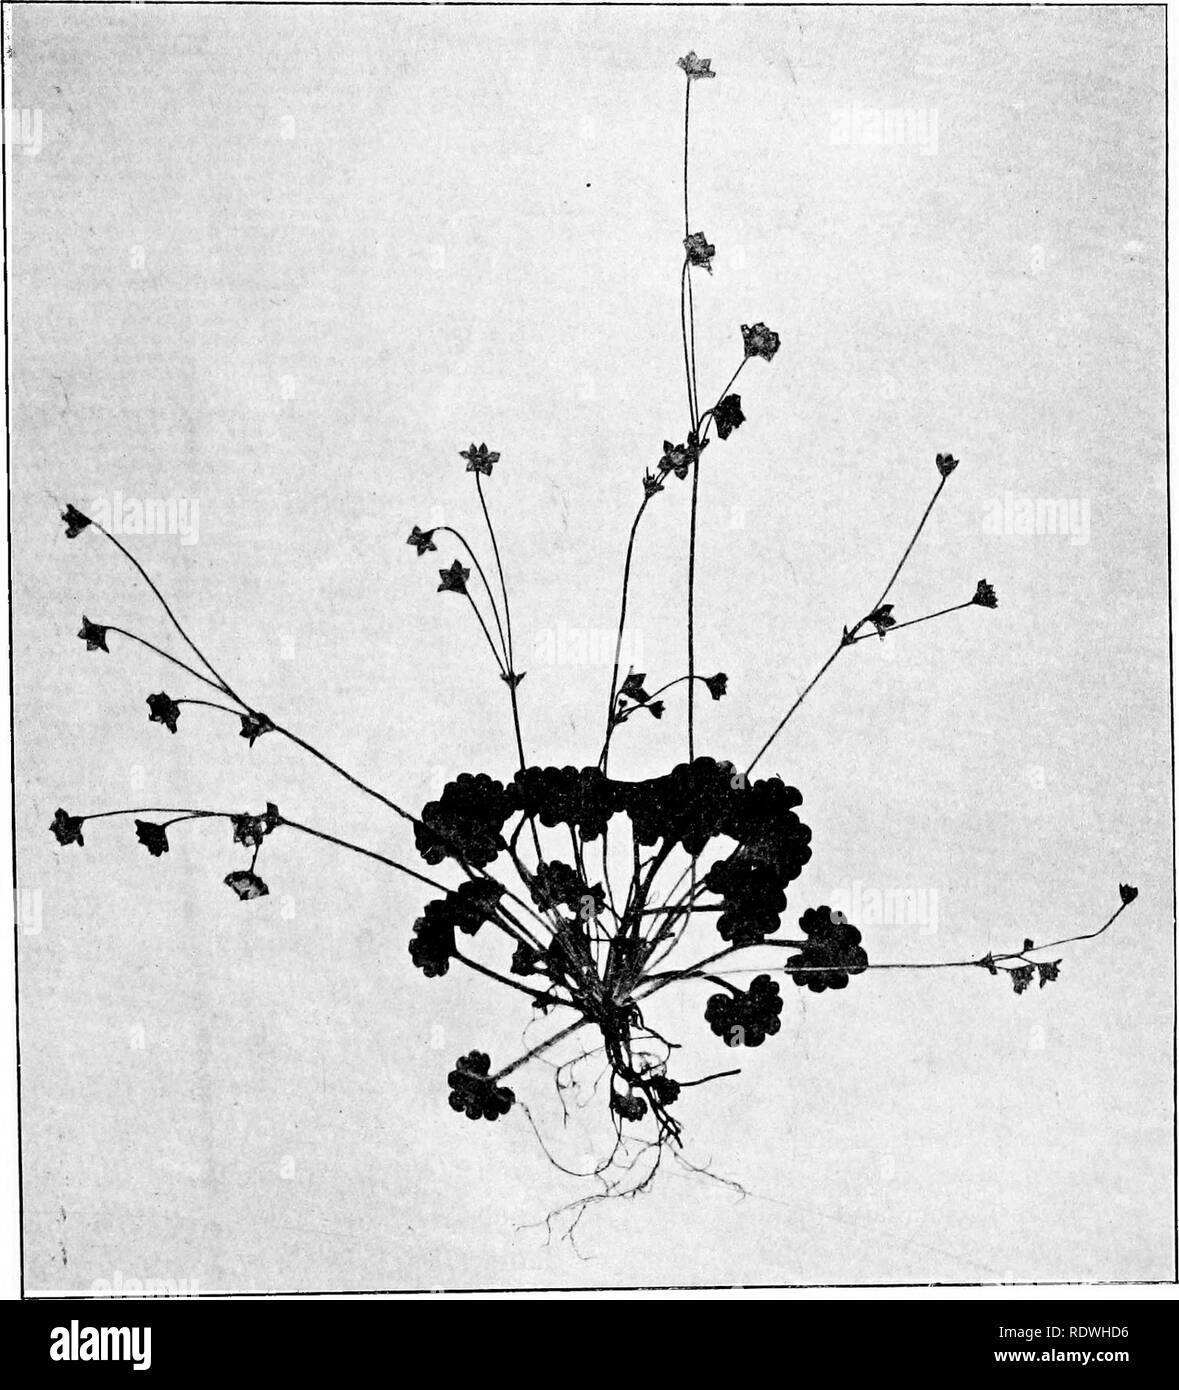 . The vegetation of the Siberian-Mongolian frontiers (the Sayansk region). Botany; Botany. rather deeply and sharply serrate. The pedicels are 1,5—2 cm. long, now and then some- what drooping. The plants are always comparatively few-flowered, only with 2—5 flowers. The calyx is 5—6 mm. long, to about the middle split into narrowly triangular lobes, pointed at the top. The petals are large, 12—14 mm. long.. Fig, 99. Androsace Gmelini (Lam.) Gaertn. (Vi). Of rather frequent occurrence in the Altaian, in mossy, shady places, along moun- tain rivulets, etc., in the subalpine region, near the tree  Stock Photo